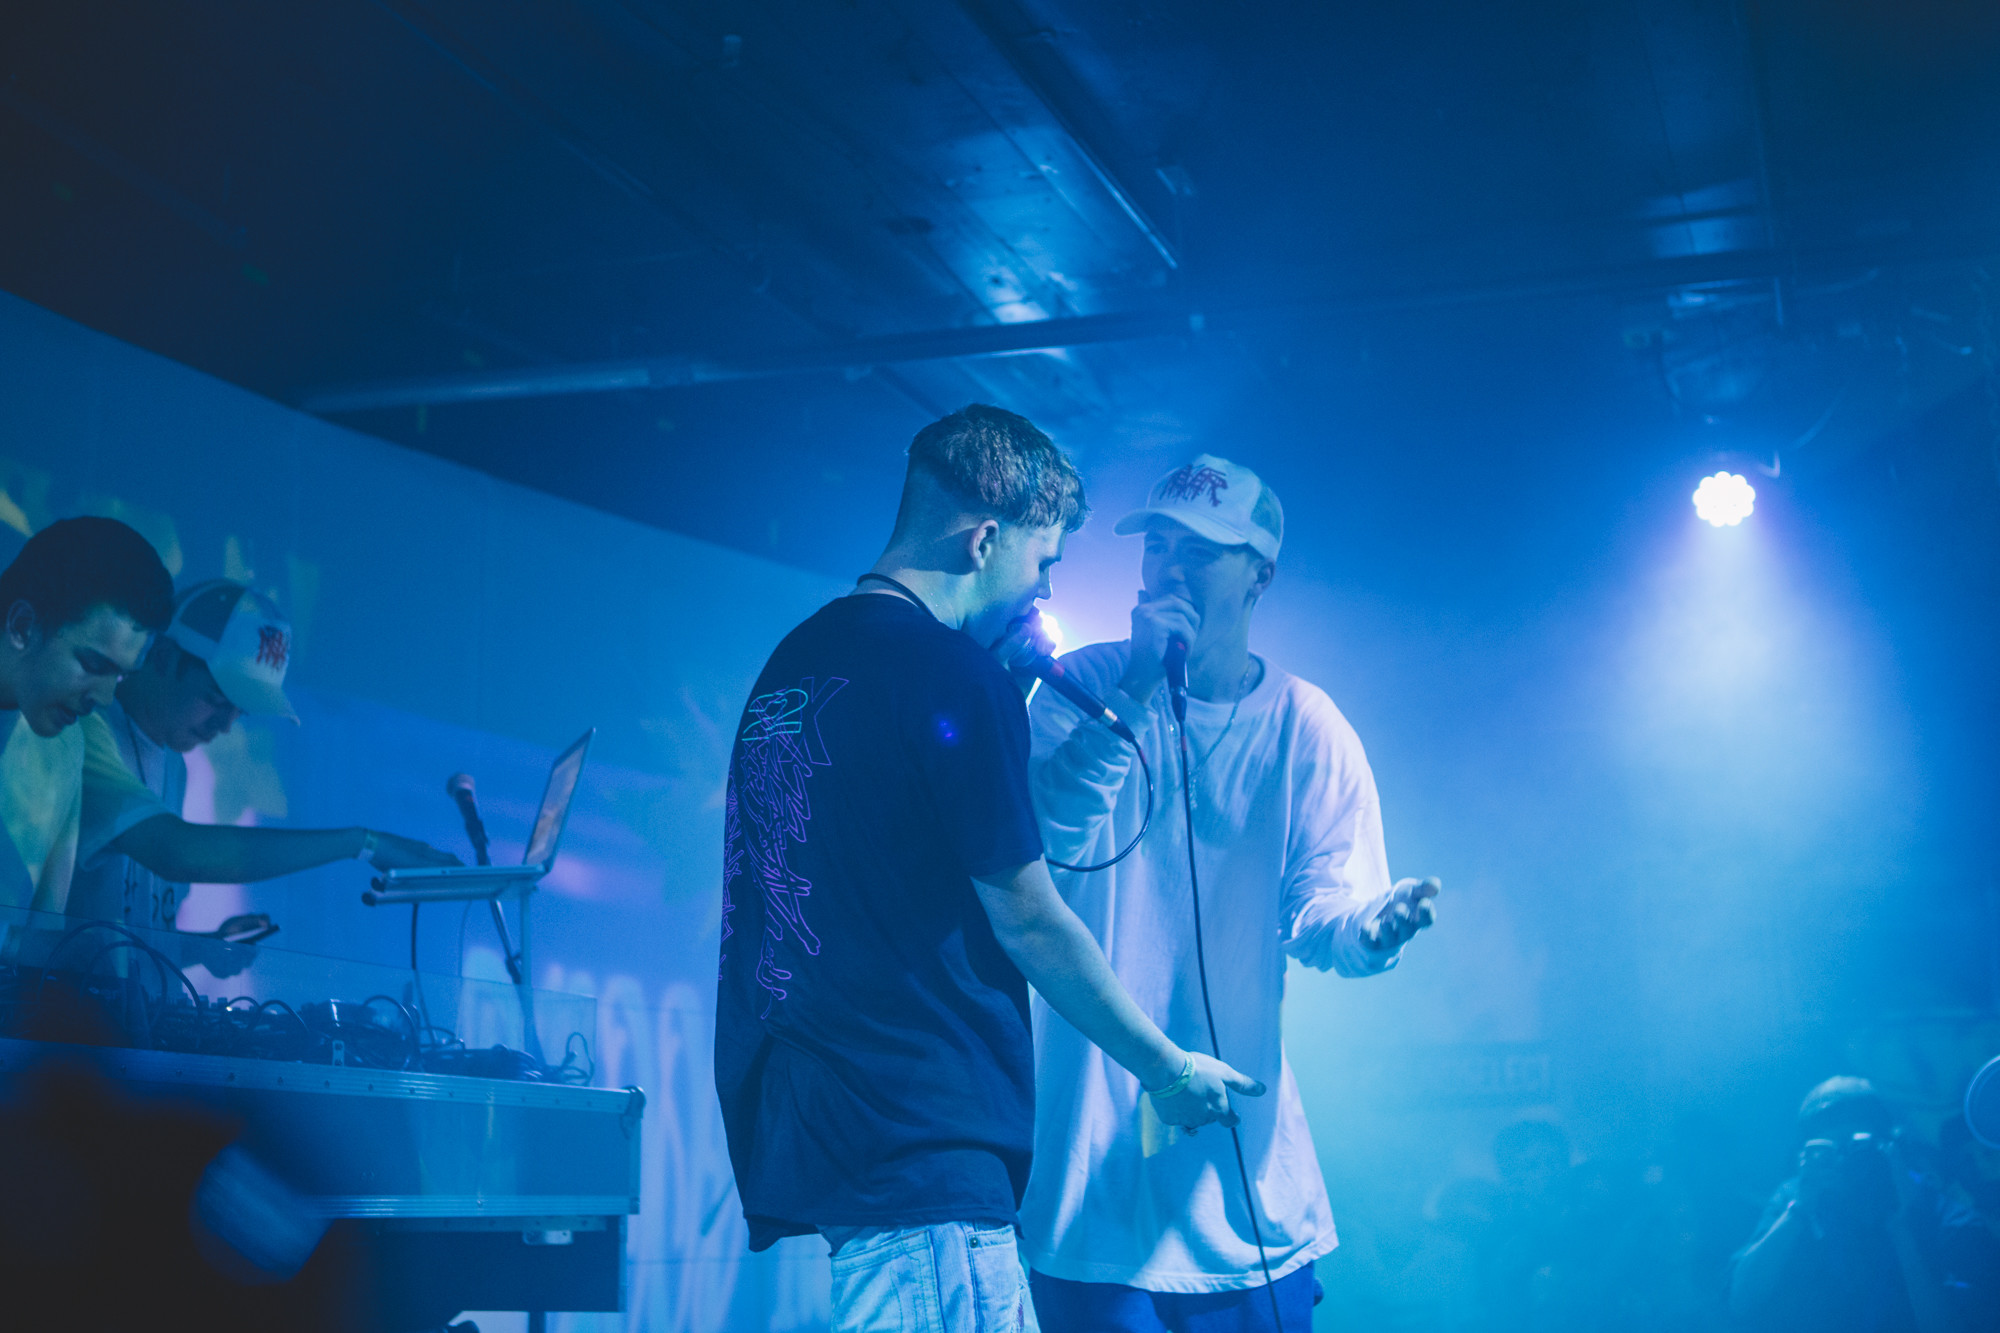 2000x1333 All Yung Lean, RL Grime and Lunice Photos by: Michael Angulo